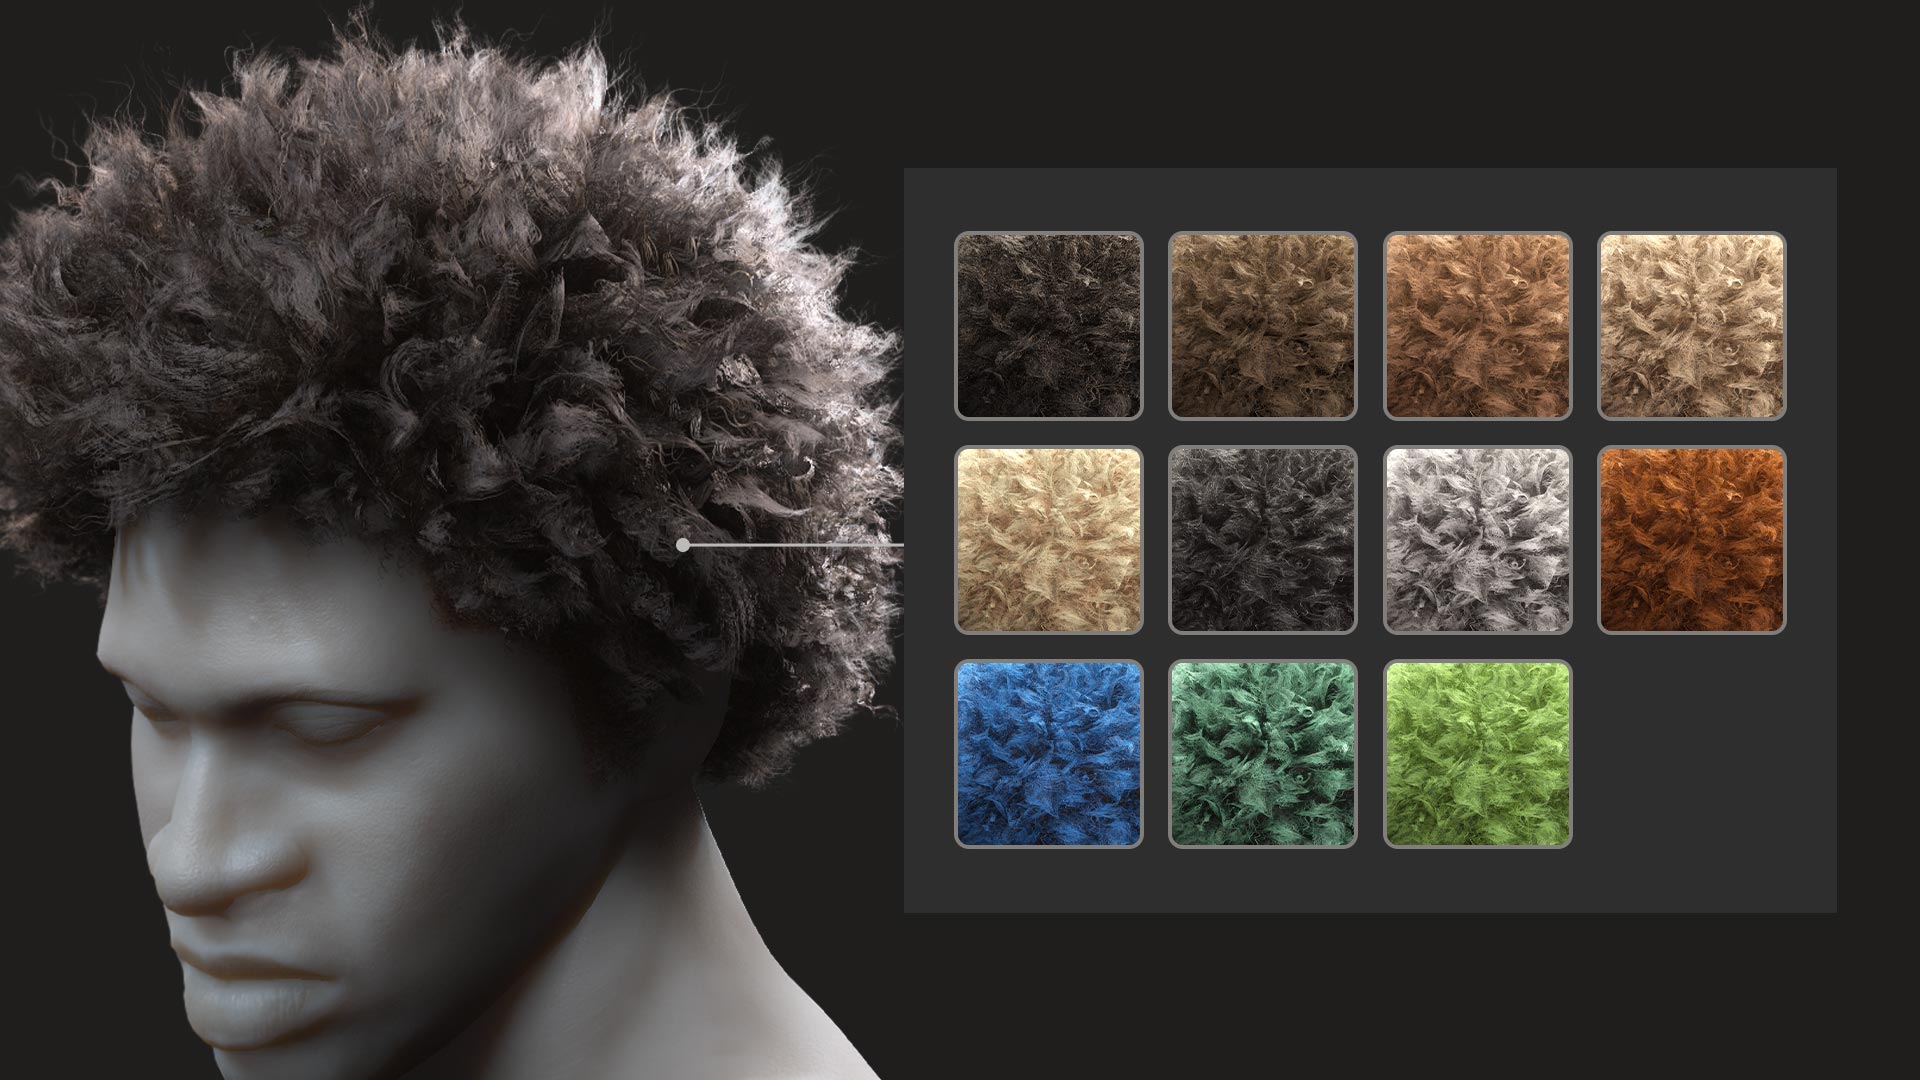 Medium Afro Hair - Character Creator/Hair - Reallusion Content Store